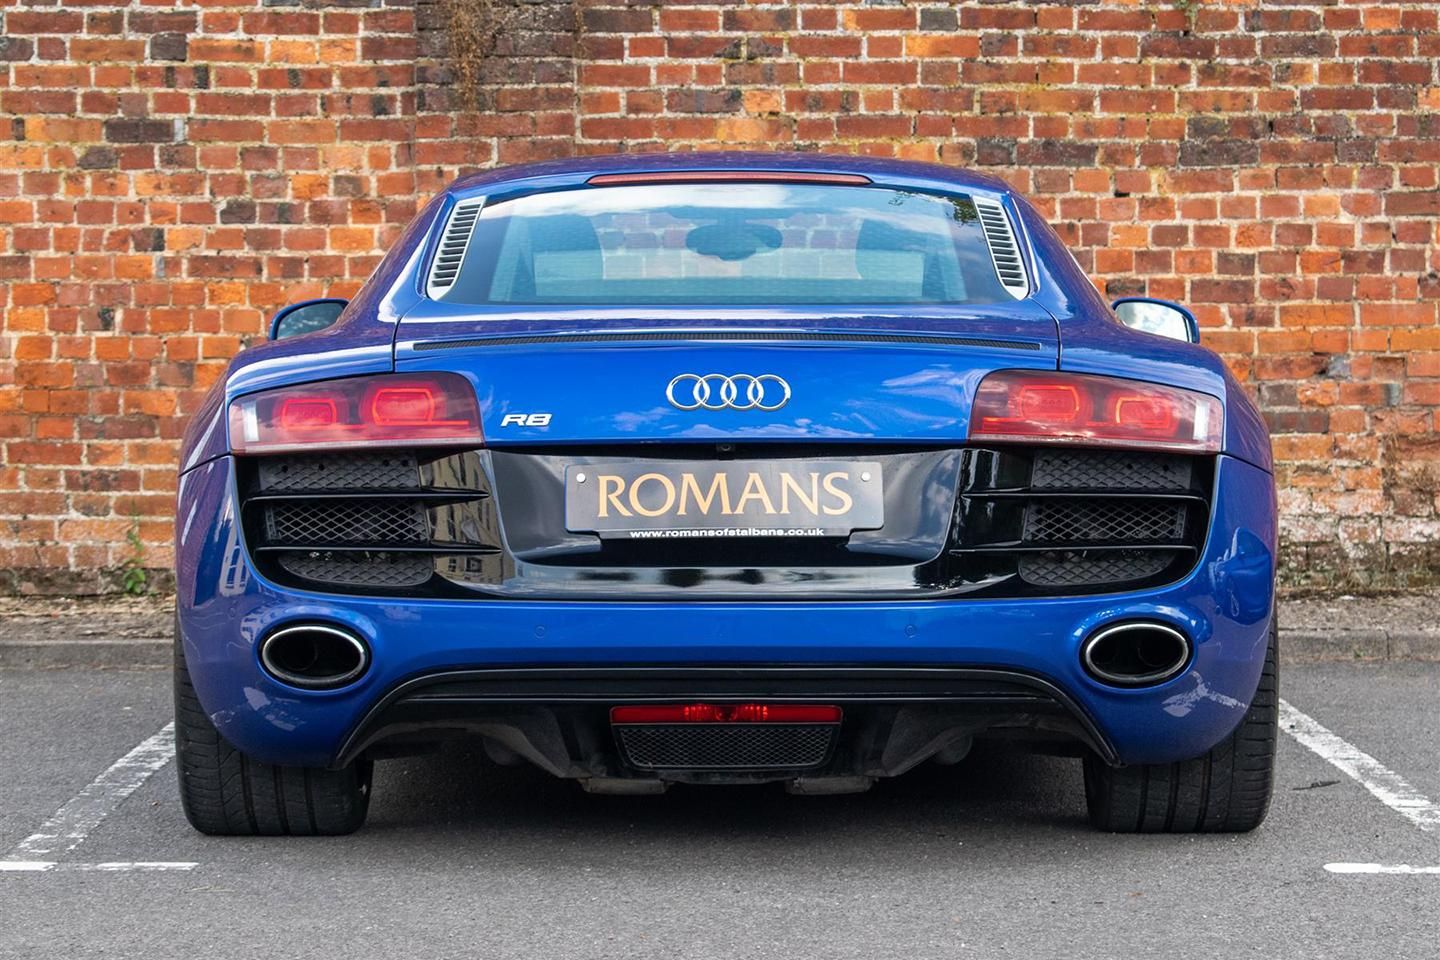 Audi R8 Coupe: Models, Generations and Details